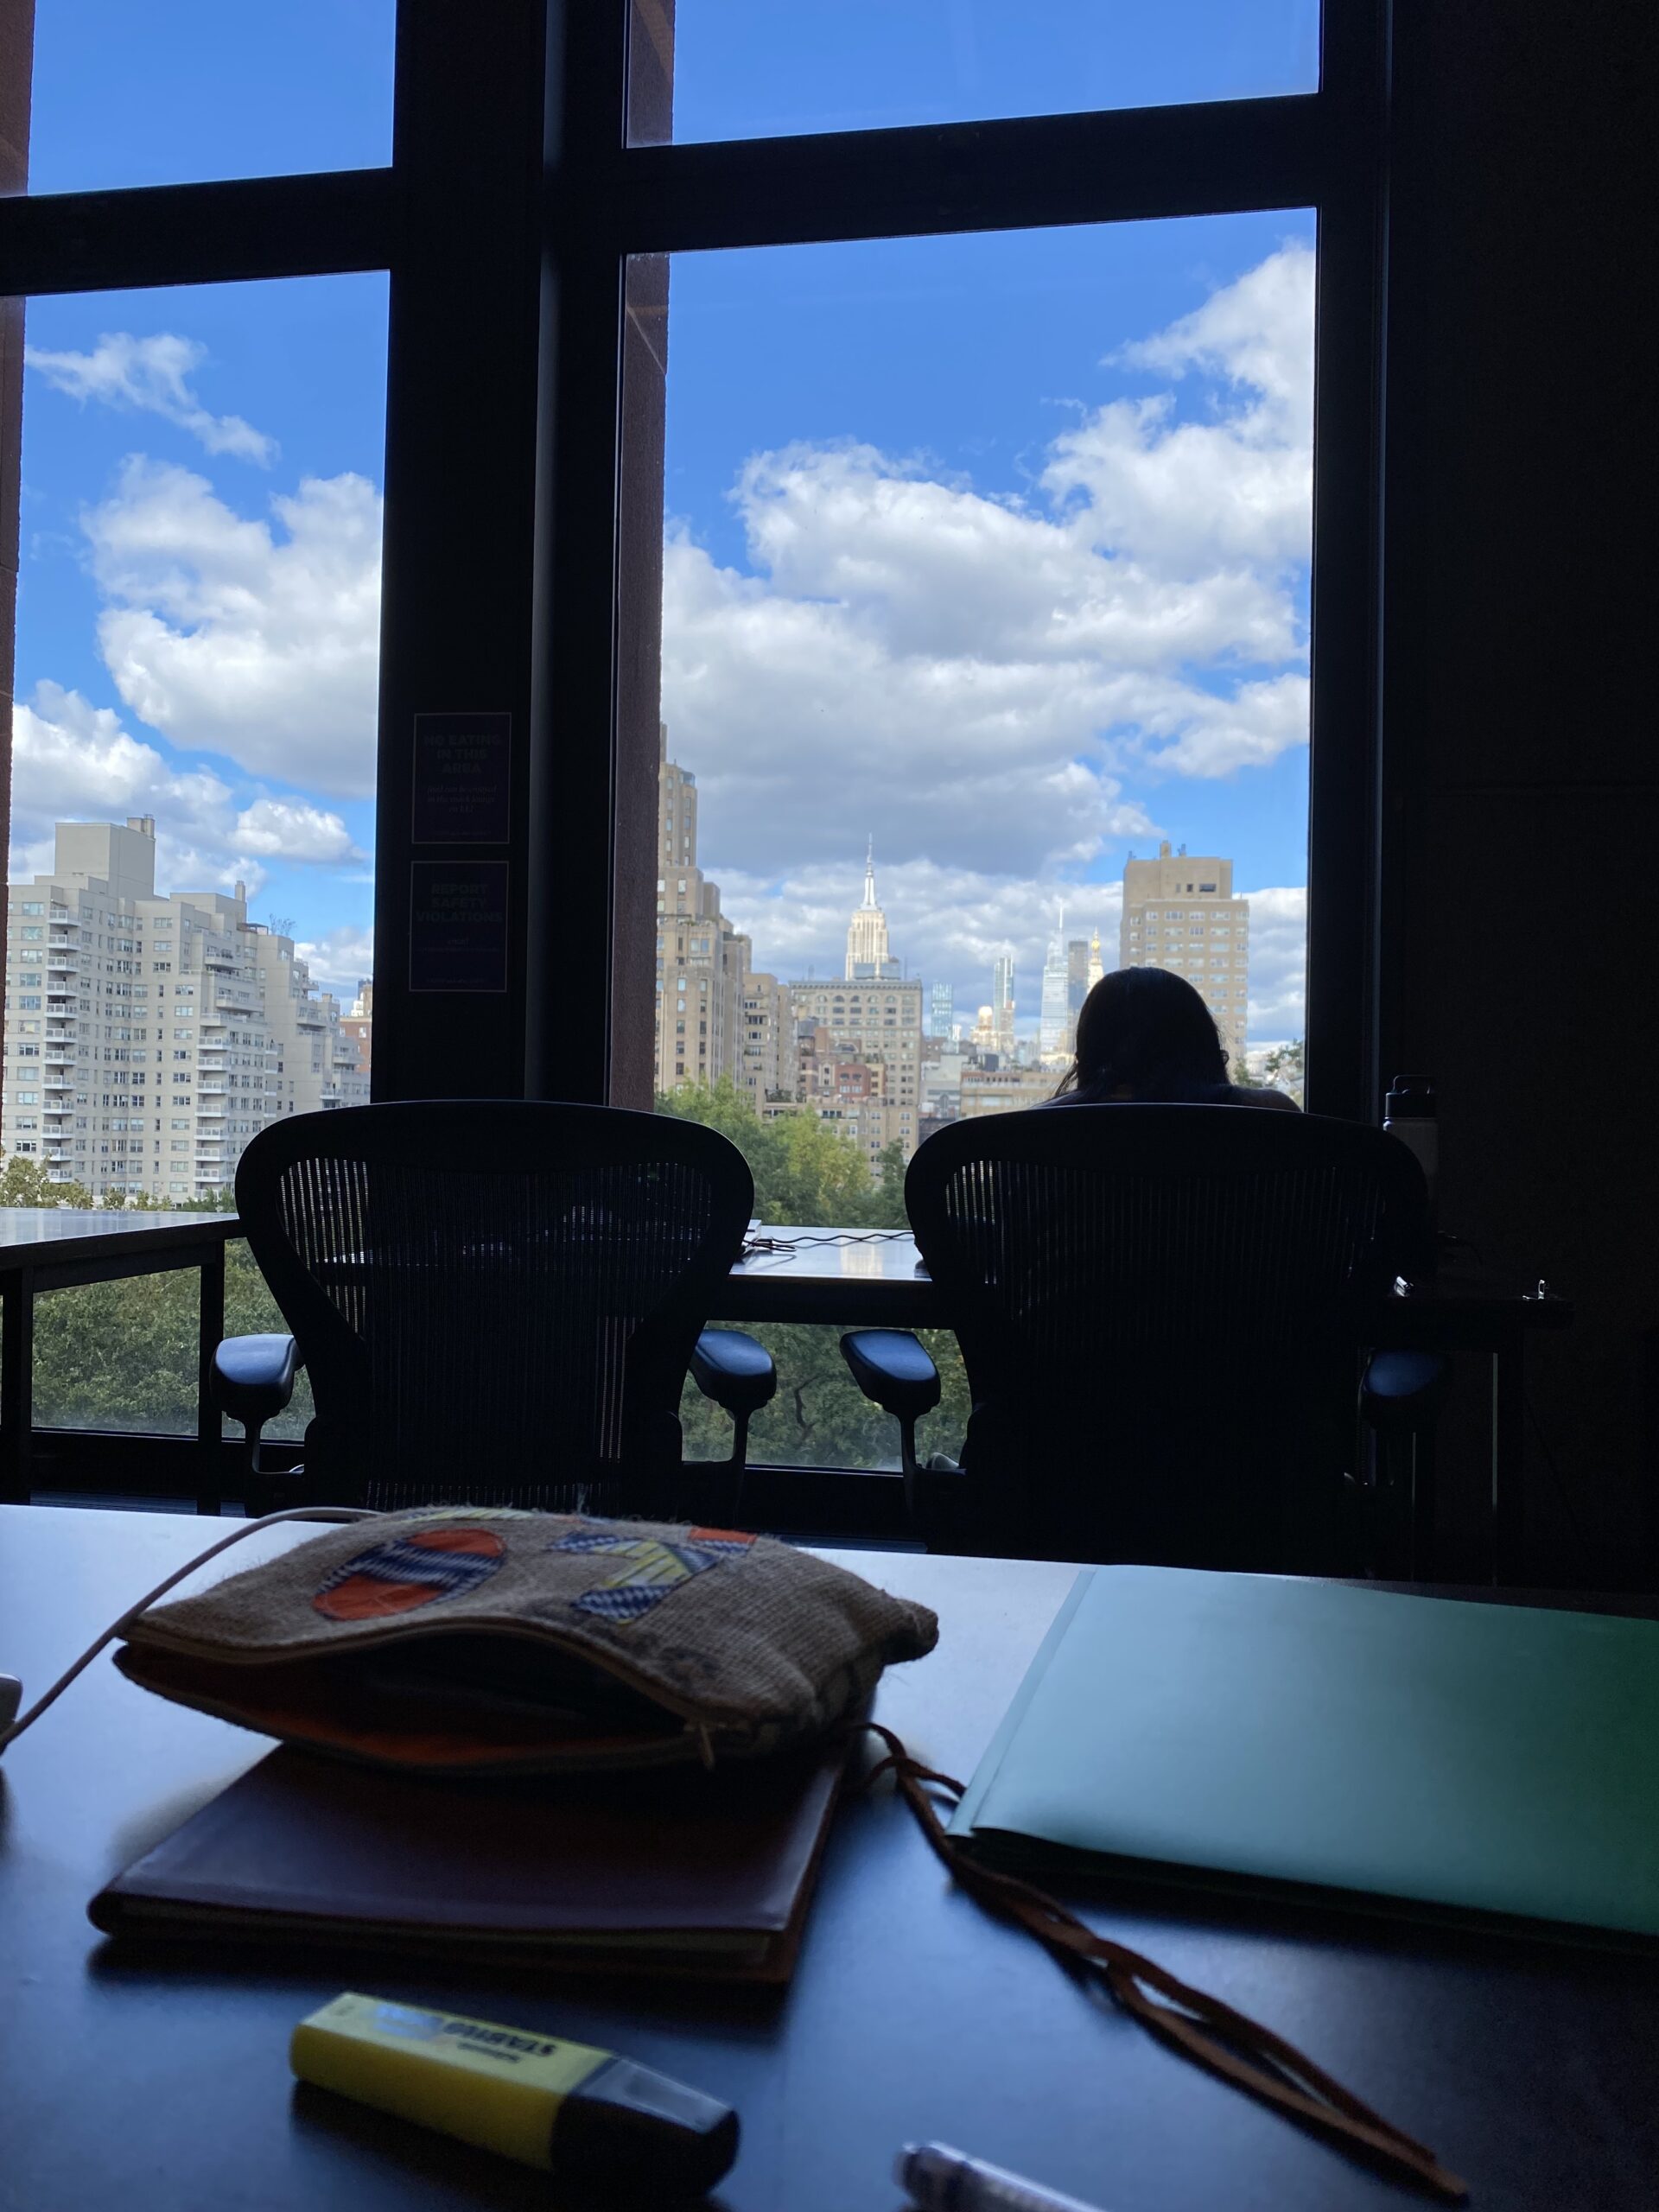 A northern window from the 8th floor of NYU’s Bobst Library, where one can see New York City’s Fifth Avenue.